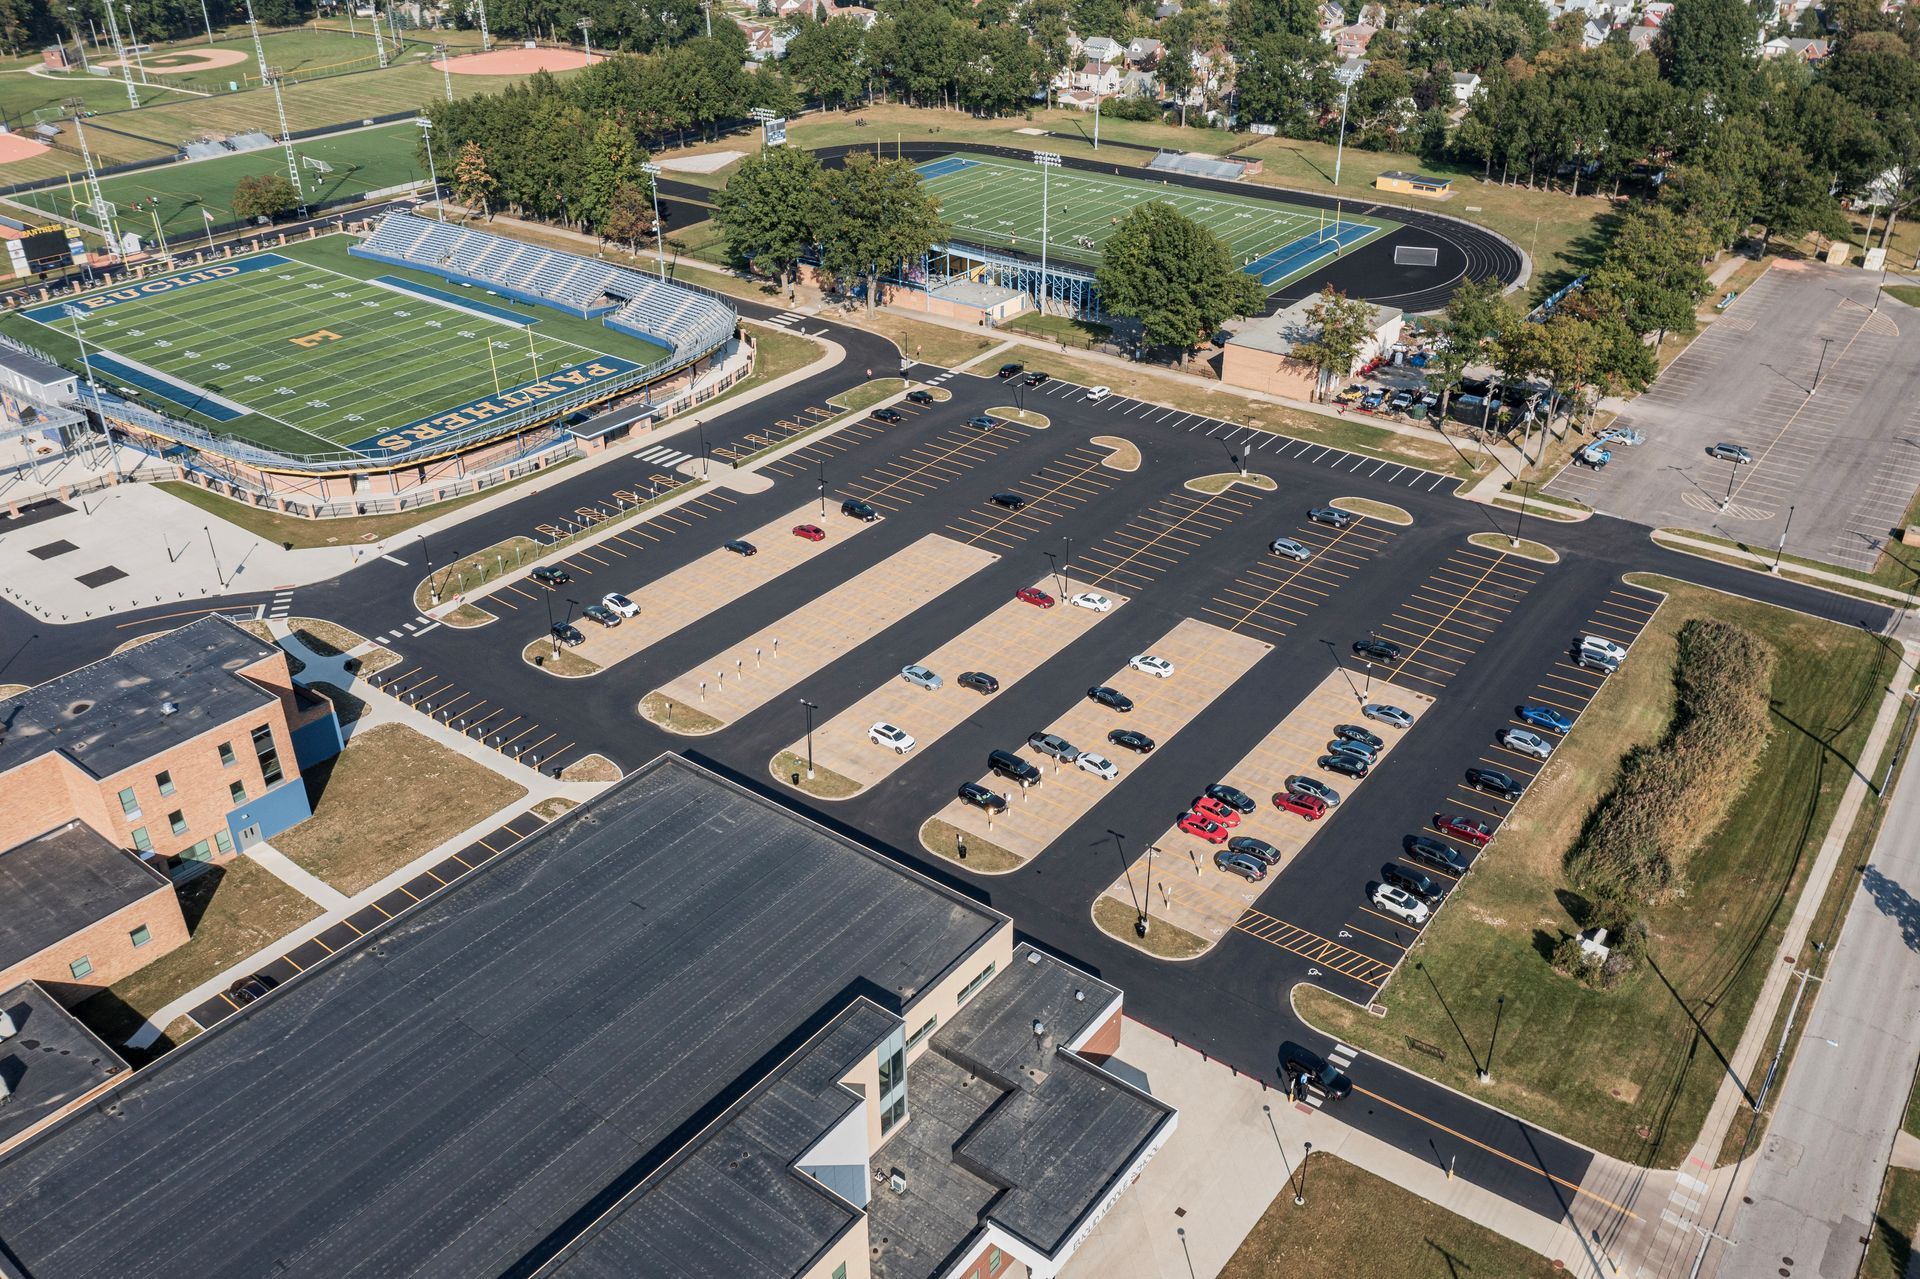 An aerial view of a parking lot with a football field in the background.